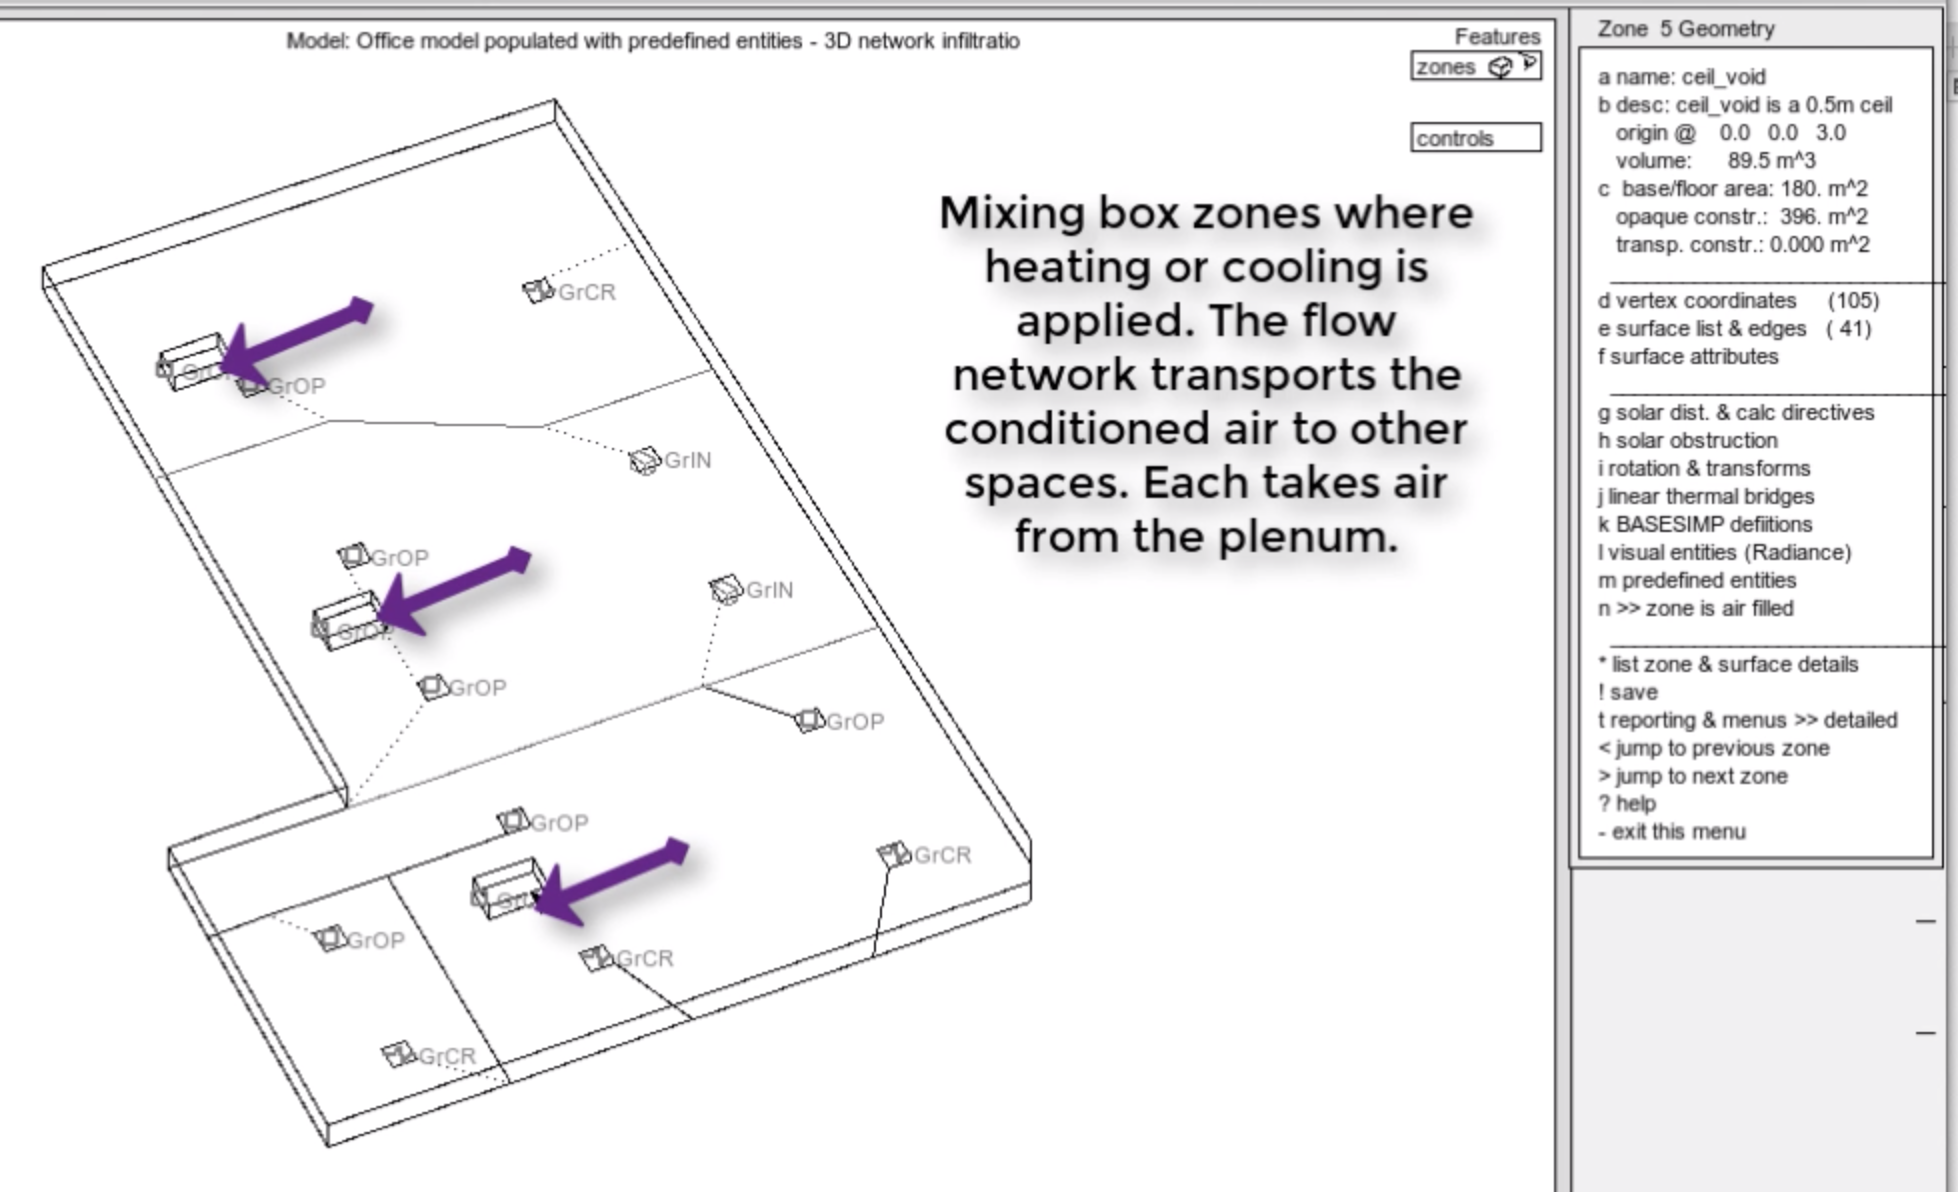 Figure 7.29: review of mixing boxes in ceiling void